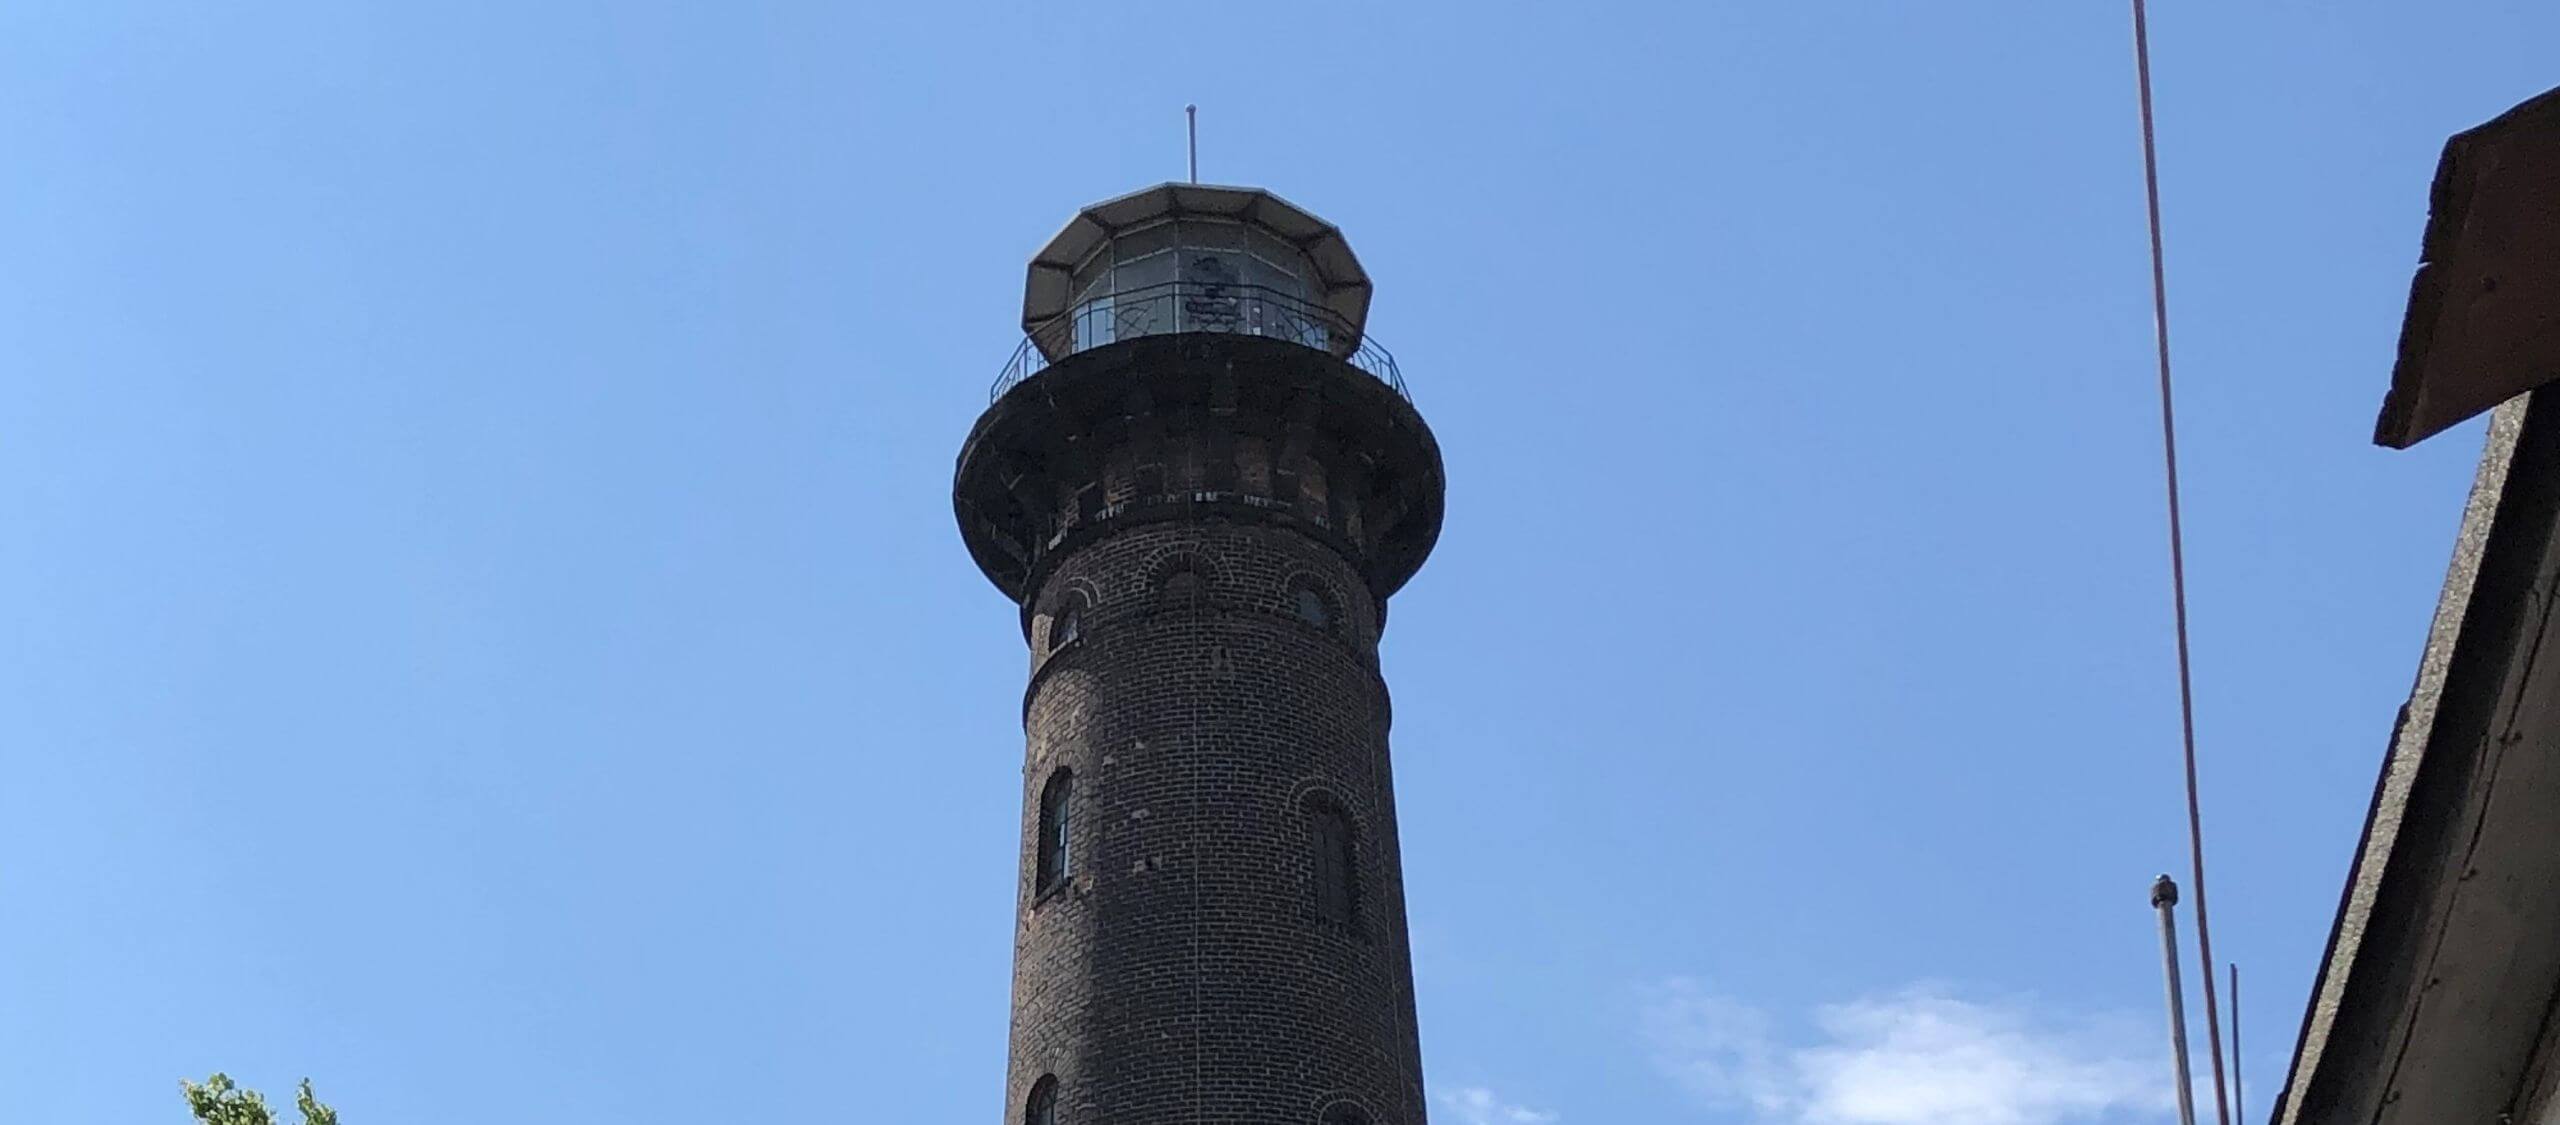 Heliosturm Guided Tours